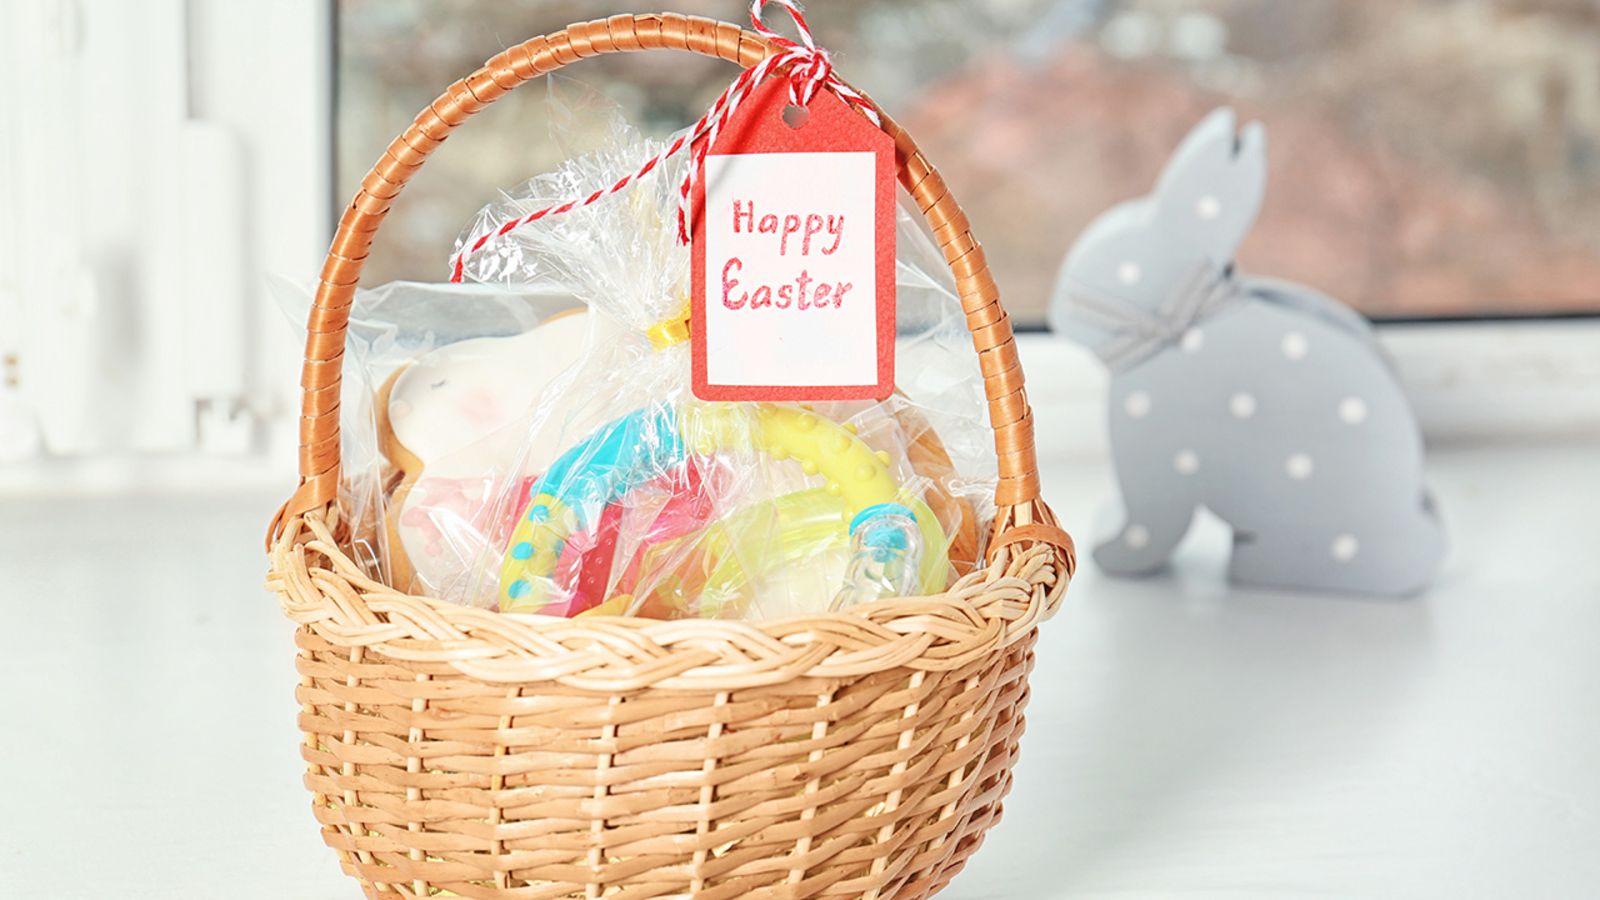 Creative Easter egg basket ideas that aren't candy